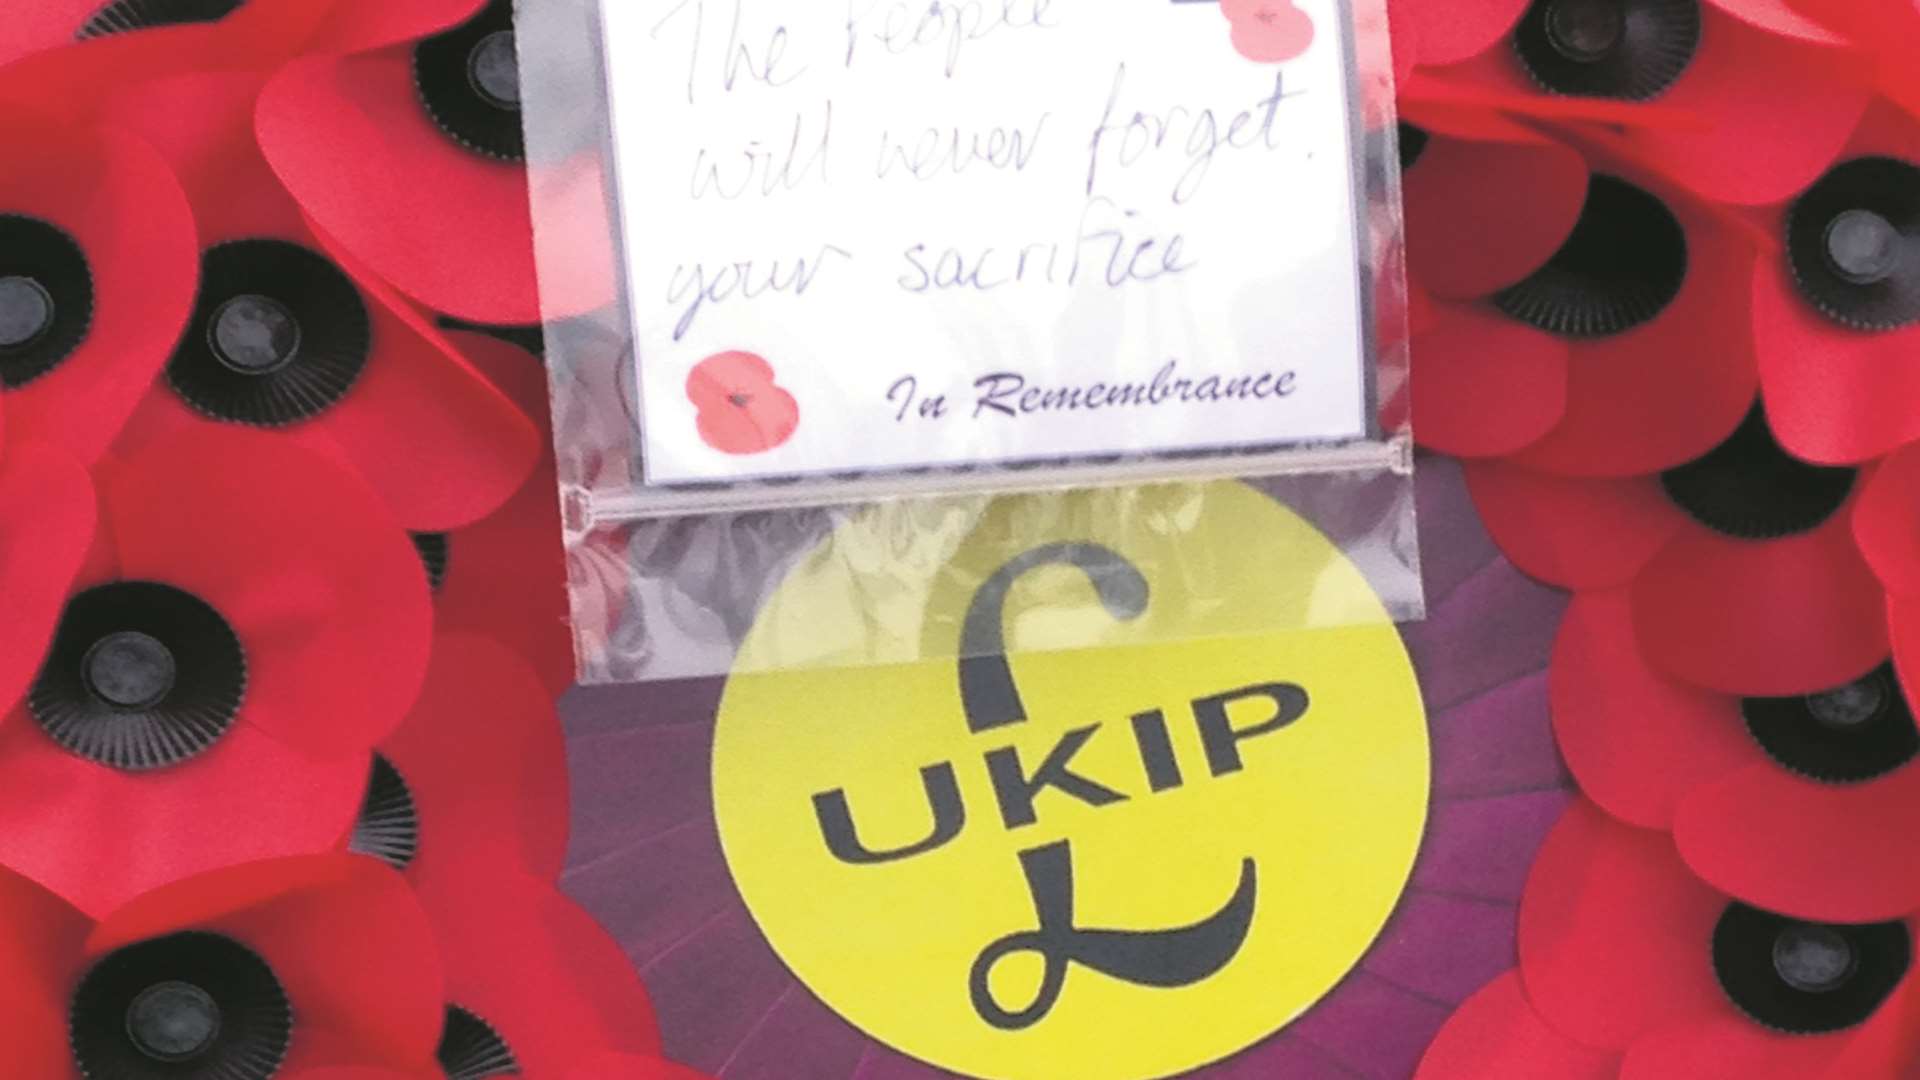 Some were angry after a wreath was laid with the Ukip logo in the centre